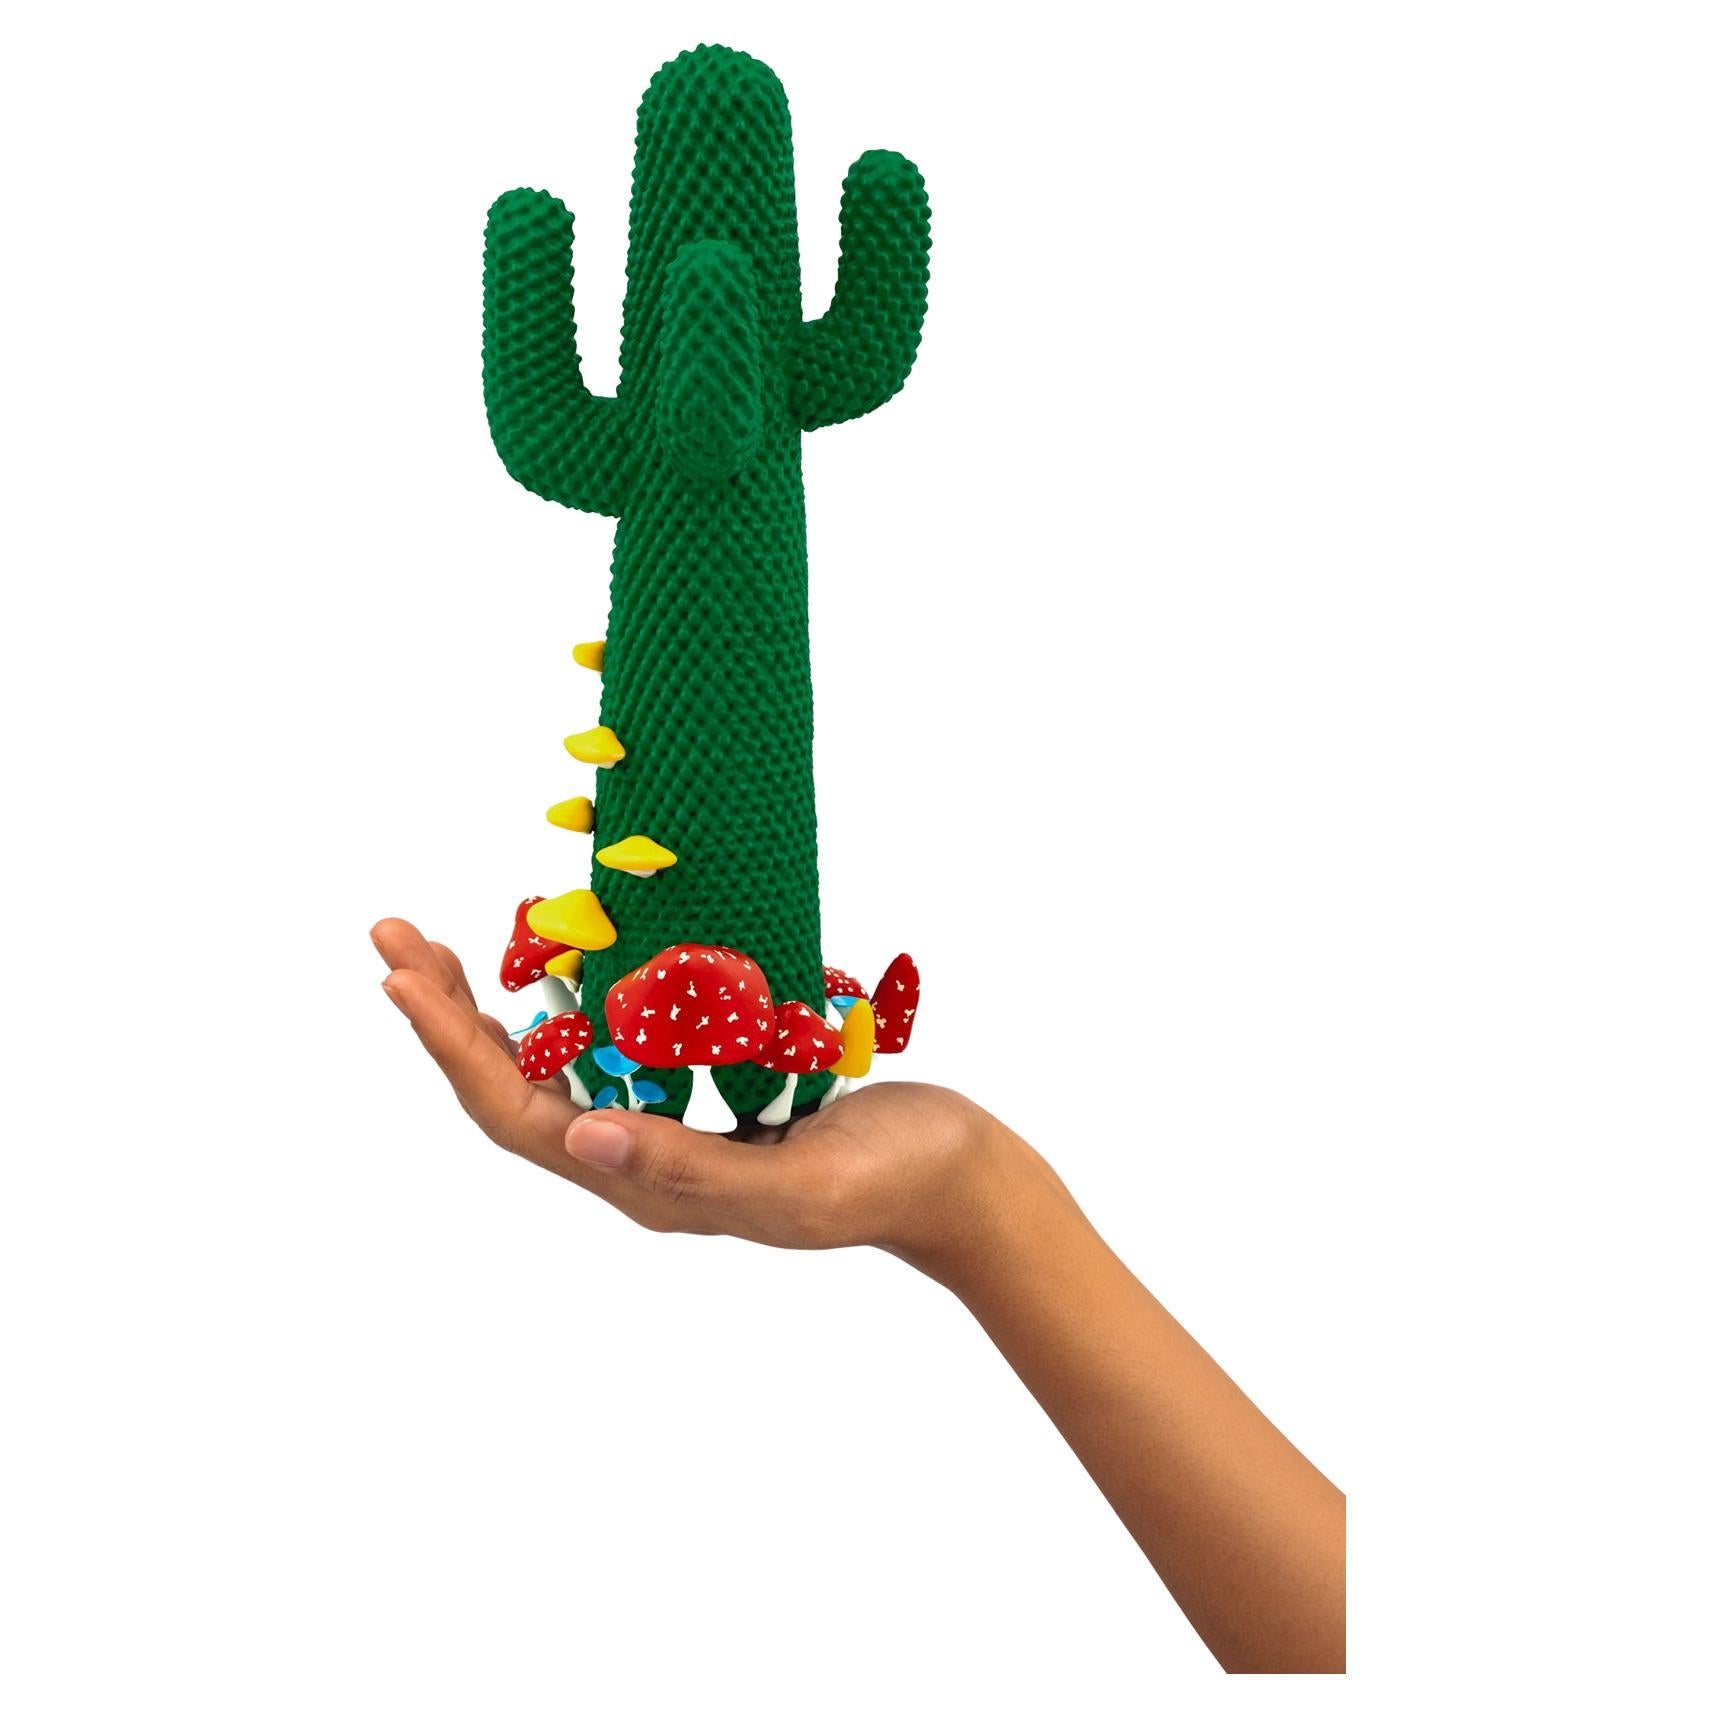 LIMITED EDITION #43/99

Gufram presents the miniaturised version of the Shroom CACTUS® created in collaboration with A$AP Rocky and the artist’s new design studio HOMMEMADE Exactly as the real-size Shroom CACTUS®, the new Guframini piece features